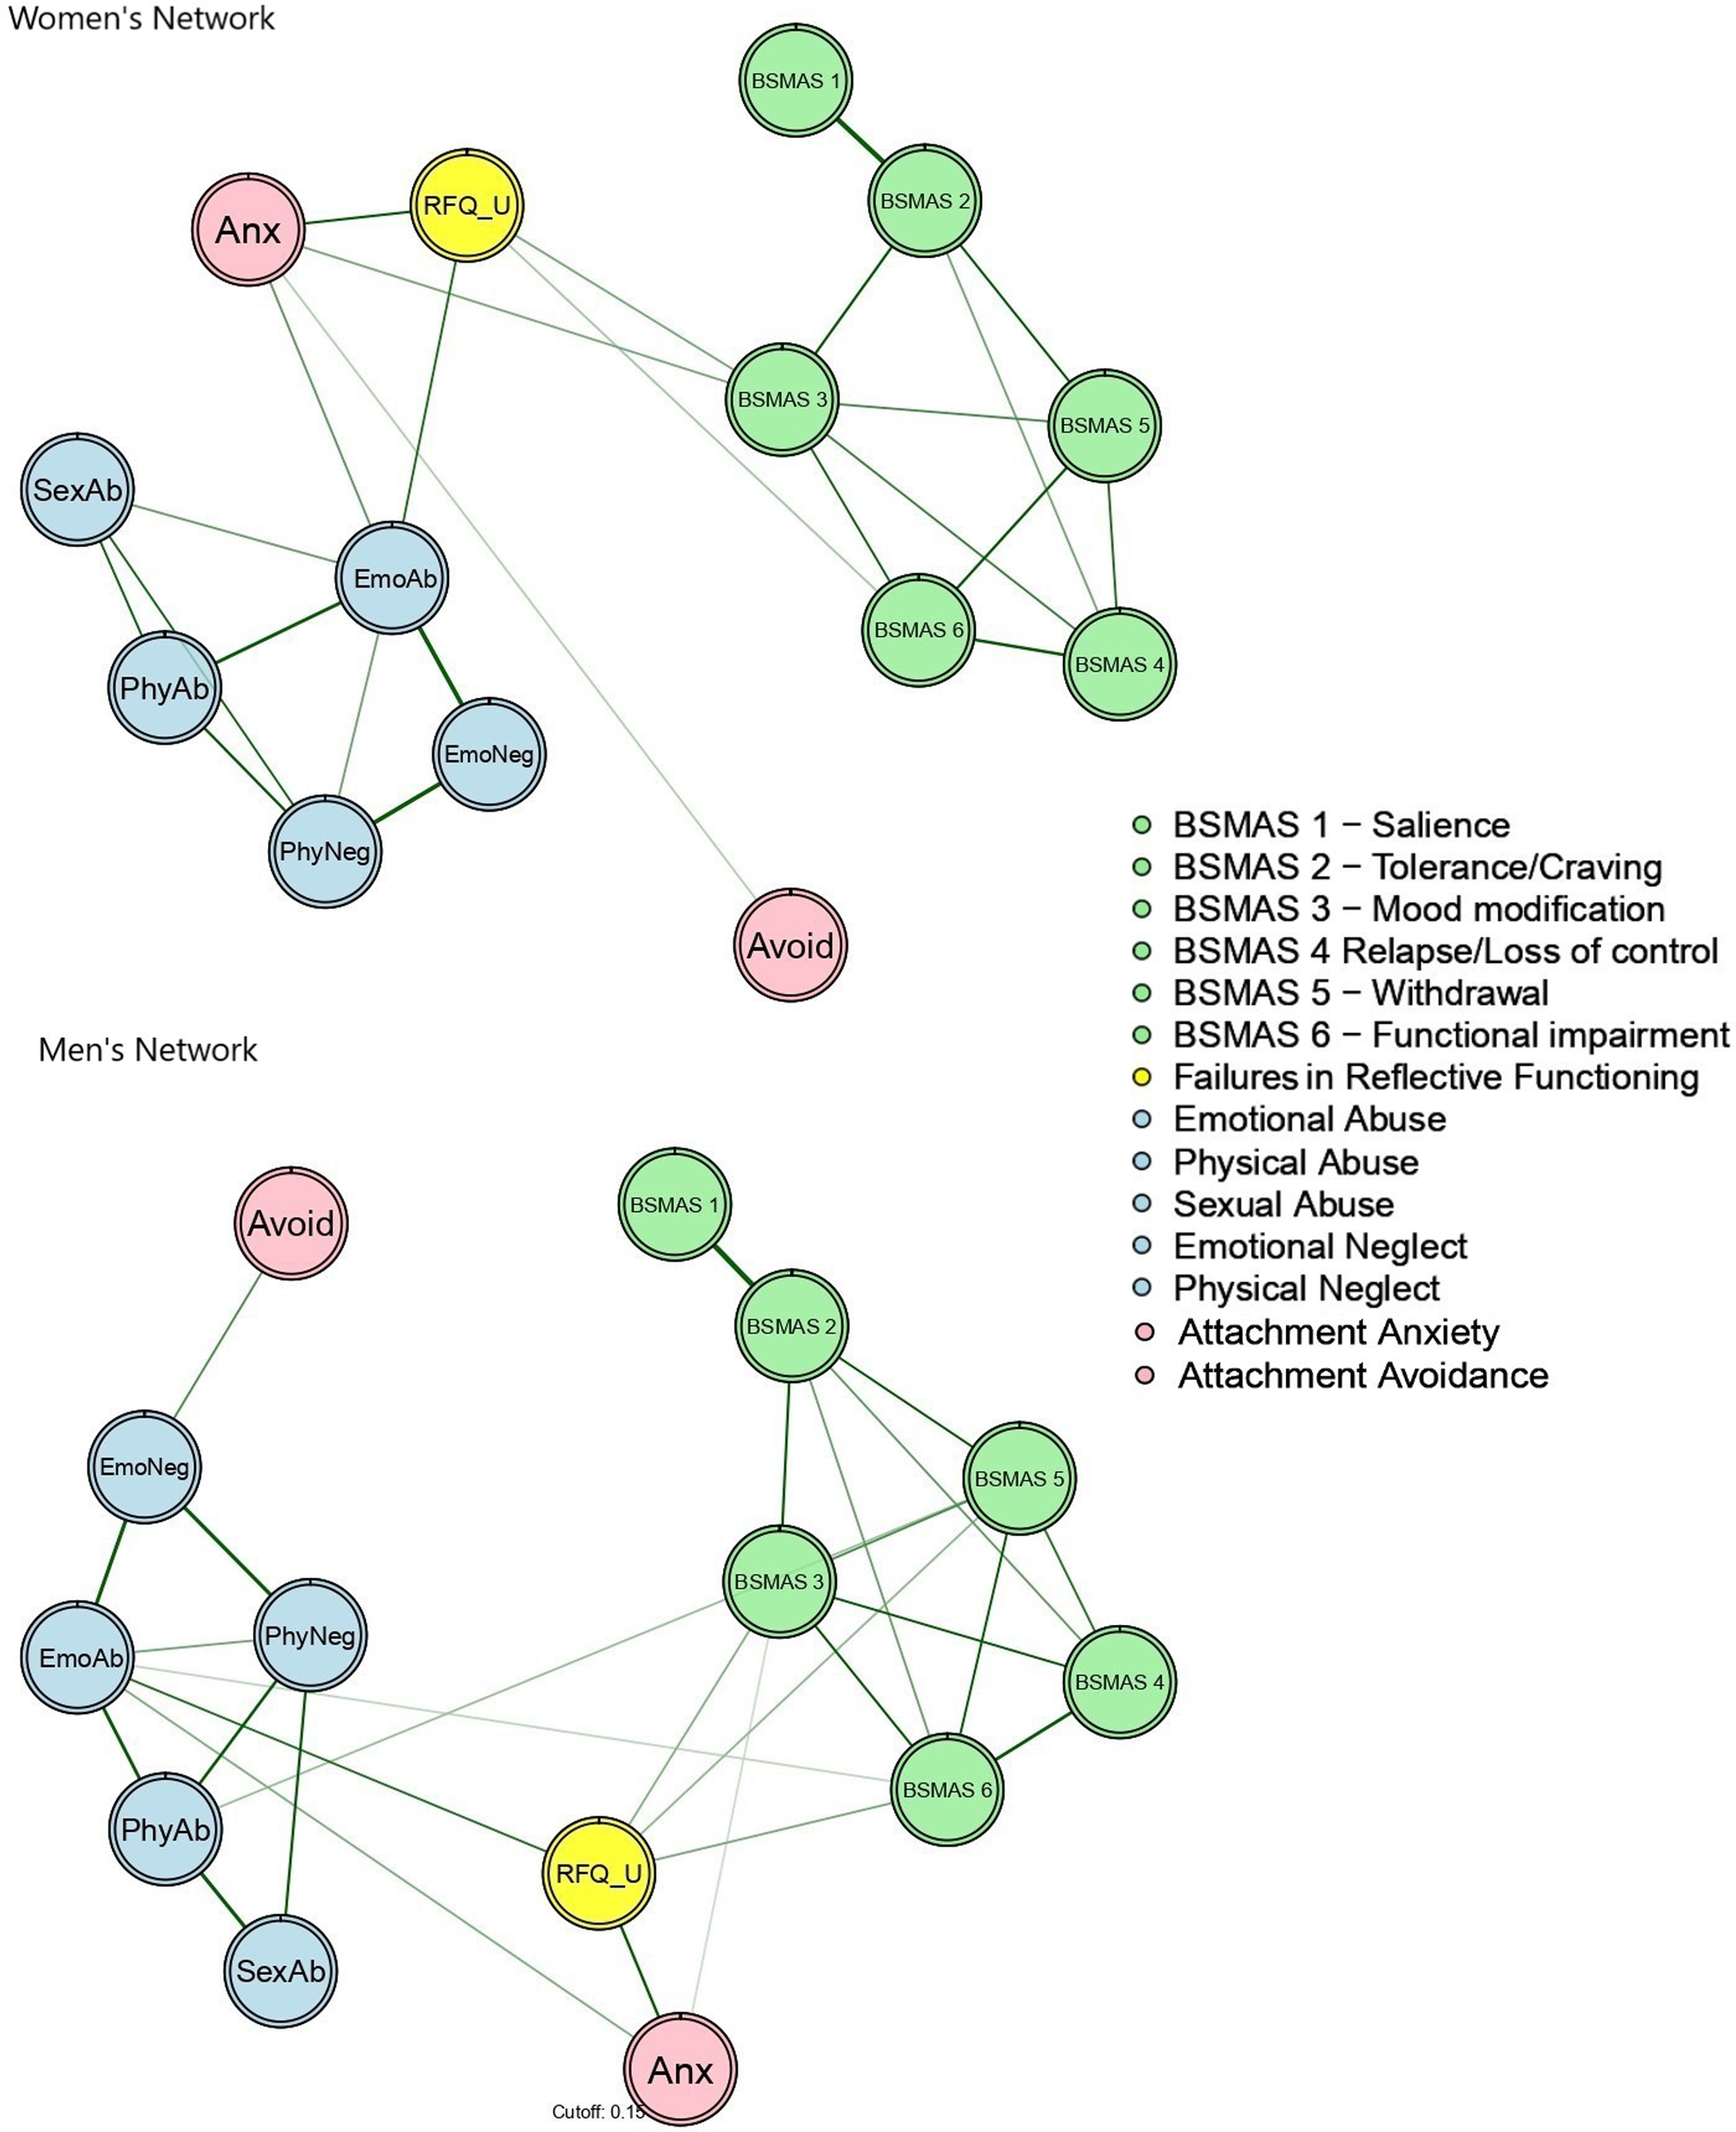 Failure in reflective functioning as a key factor in the association  between problematic social networking sites use, attachment and childhood  maltreatment: A network analysis approach on gender differences, Development and Psychopathology